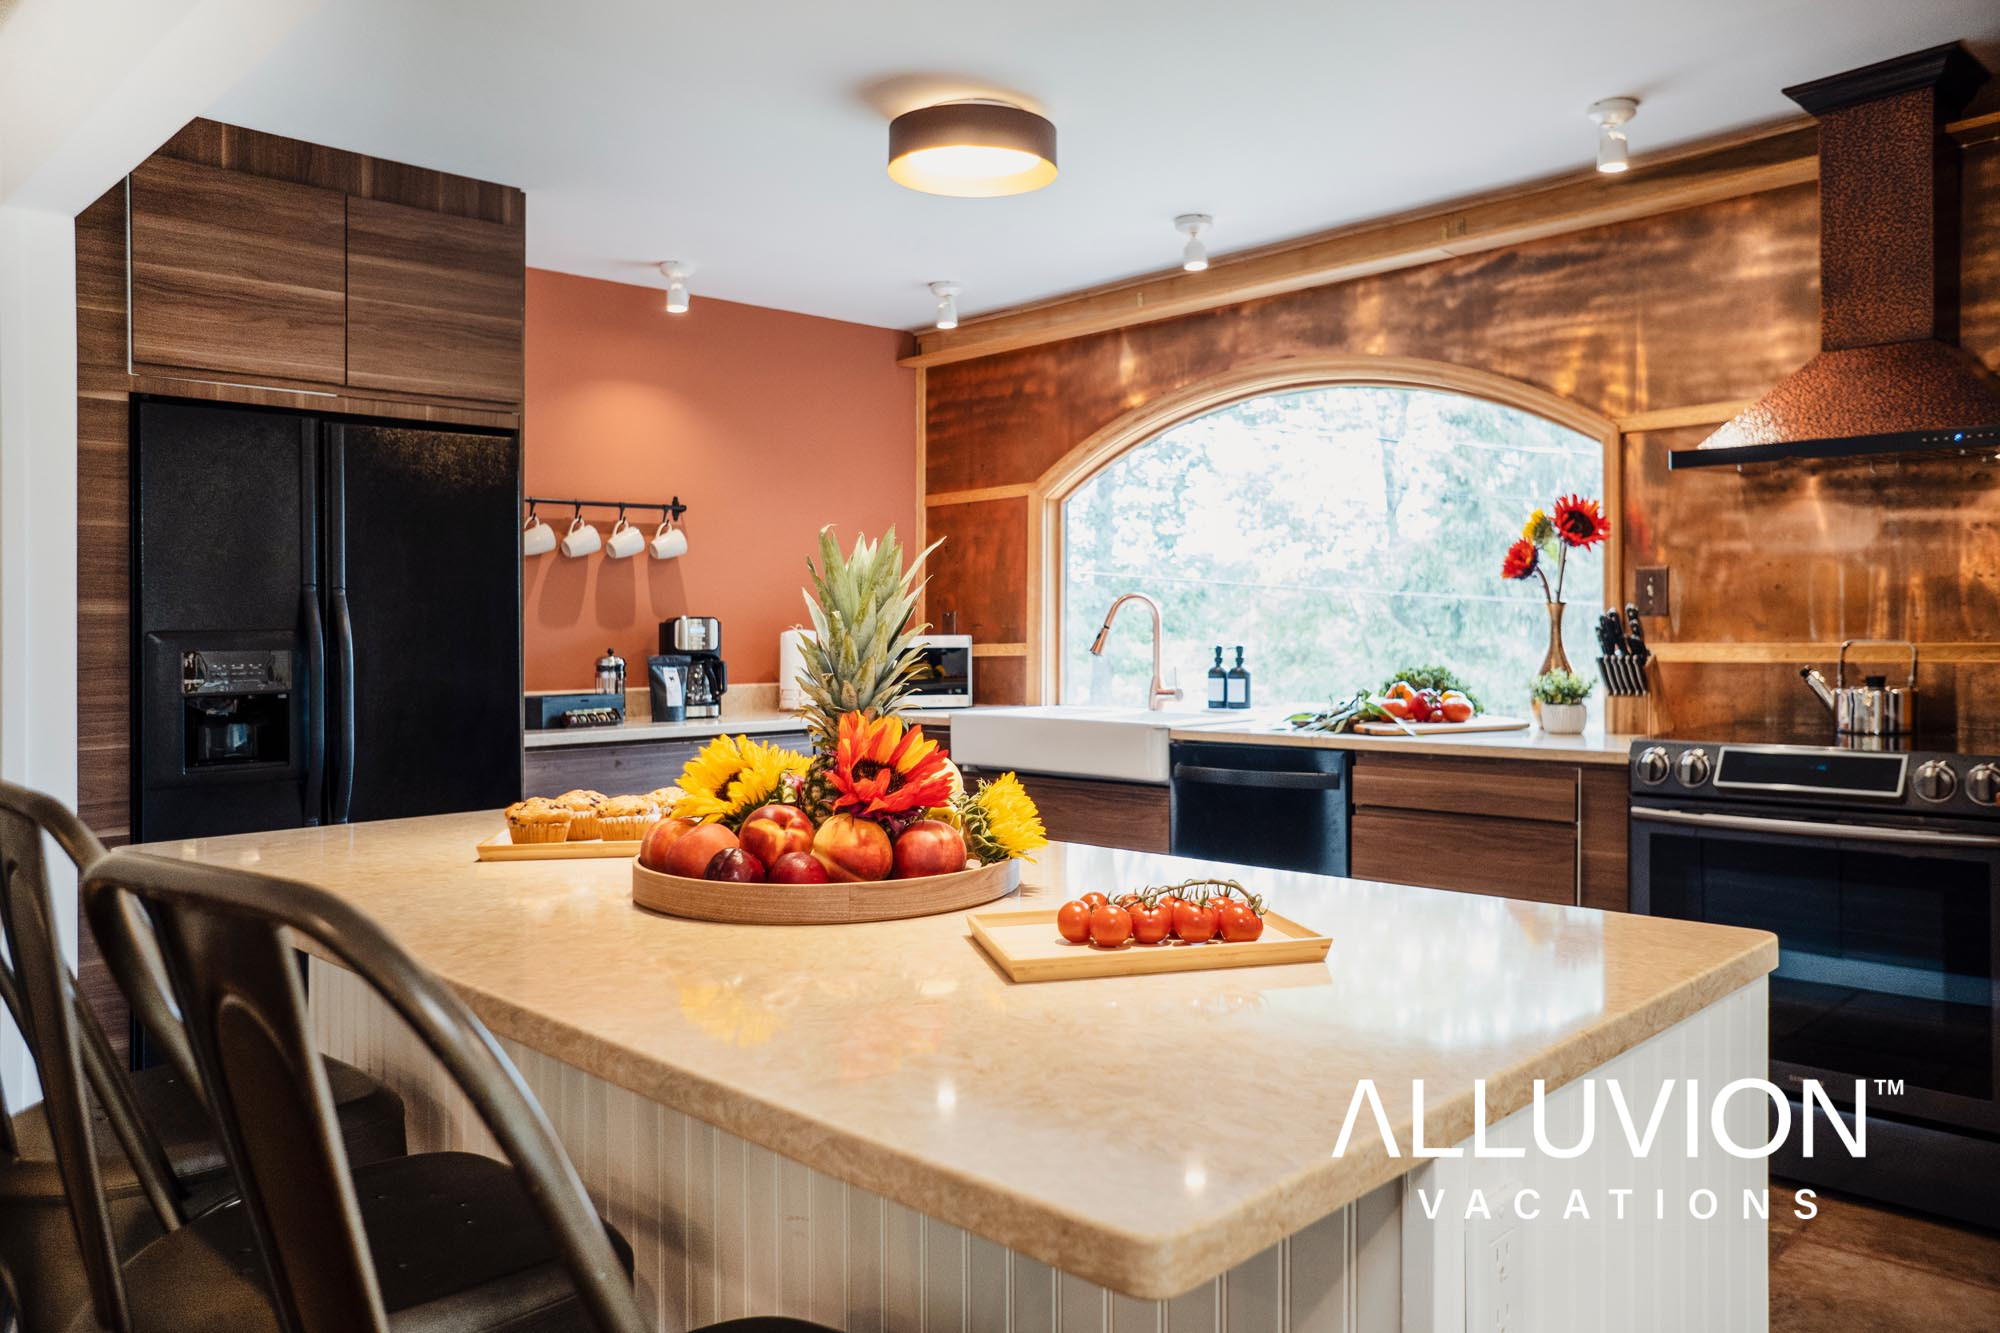 Luxury Airbnb Experience Upgrades at the Alluvion Vacation Properties – Fruit Basket – Fresh Local Veggie Basket – Skincare Basket – Spa Basket